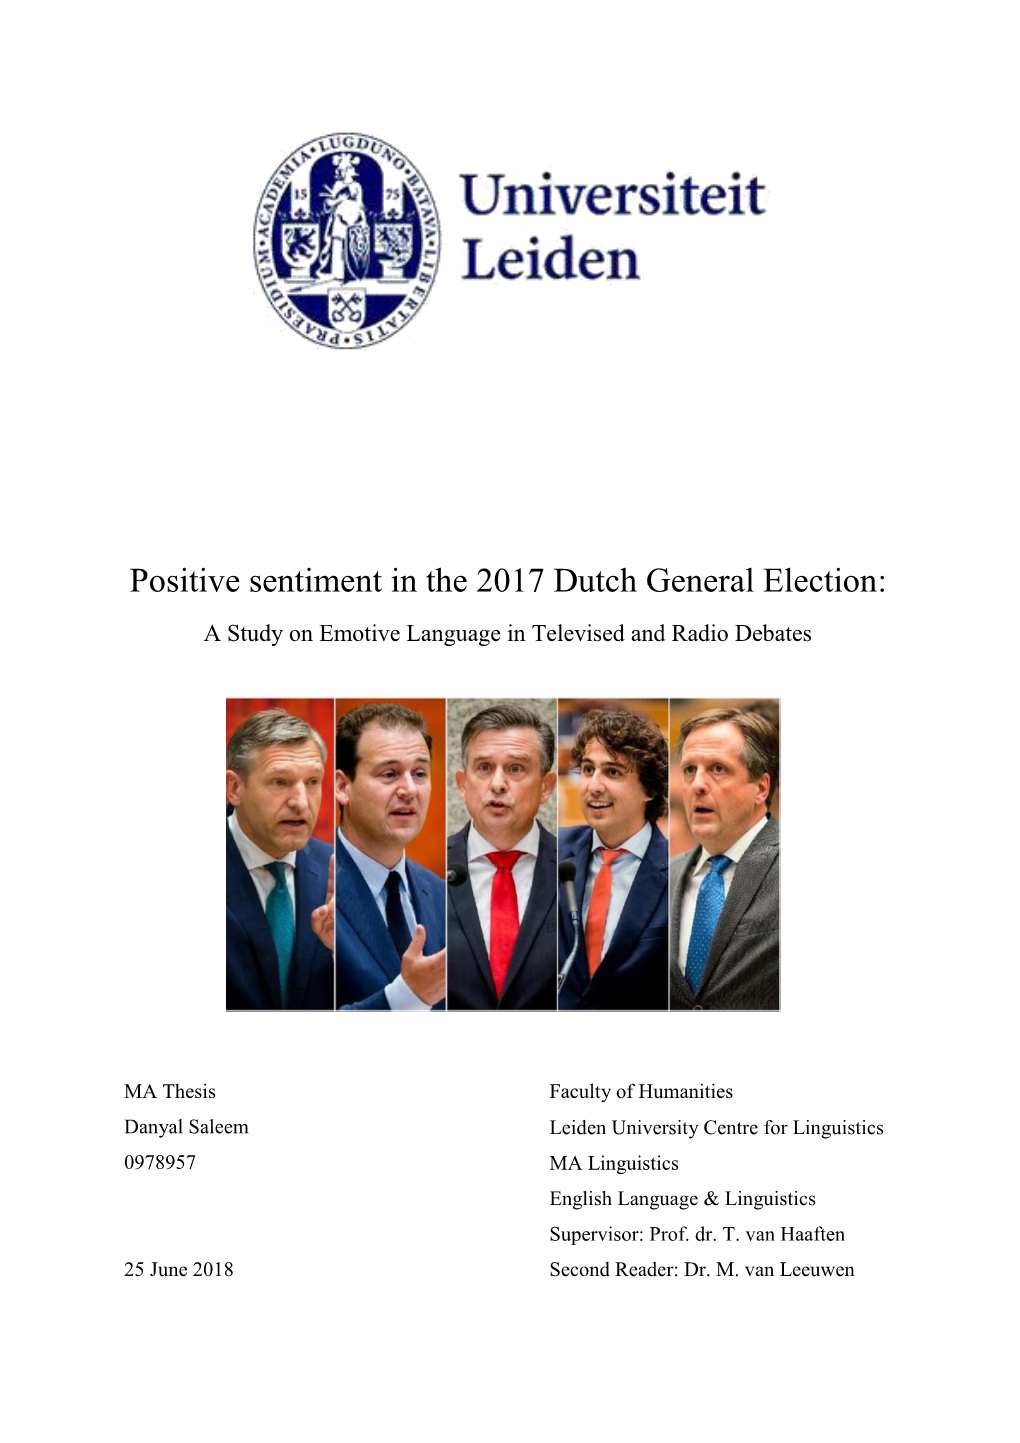 Positive Sentiment in the 2017 Dutch General Election